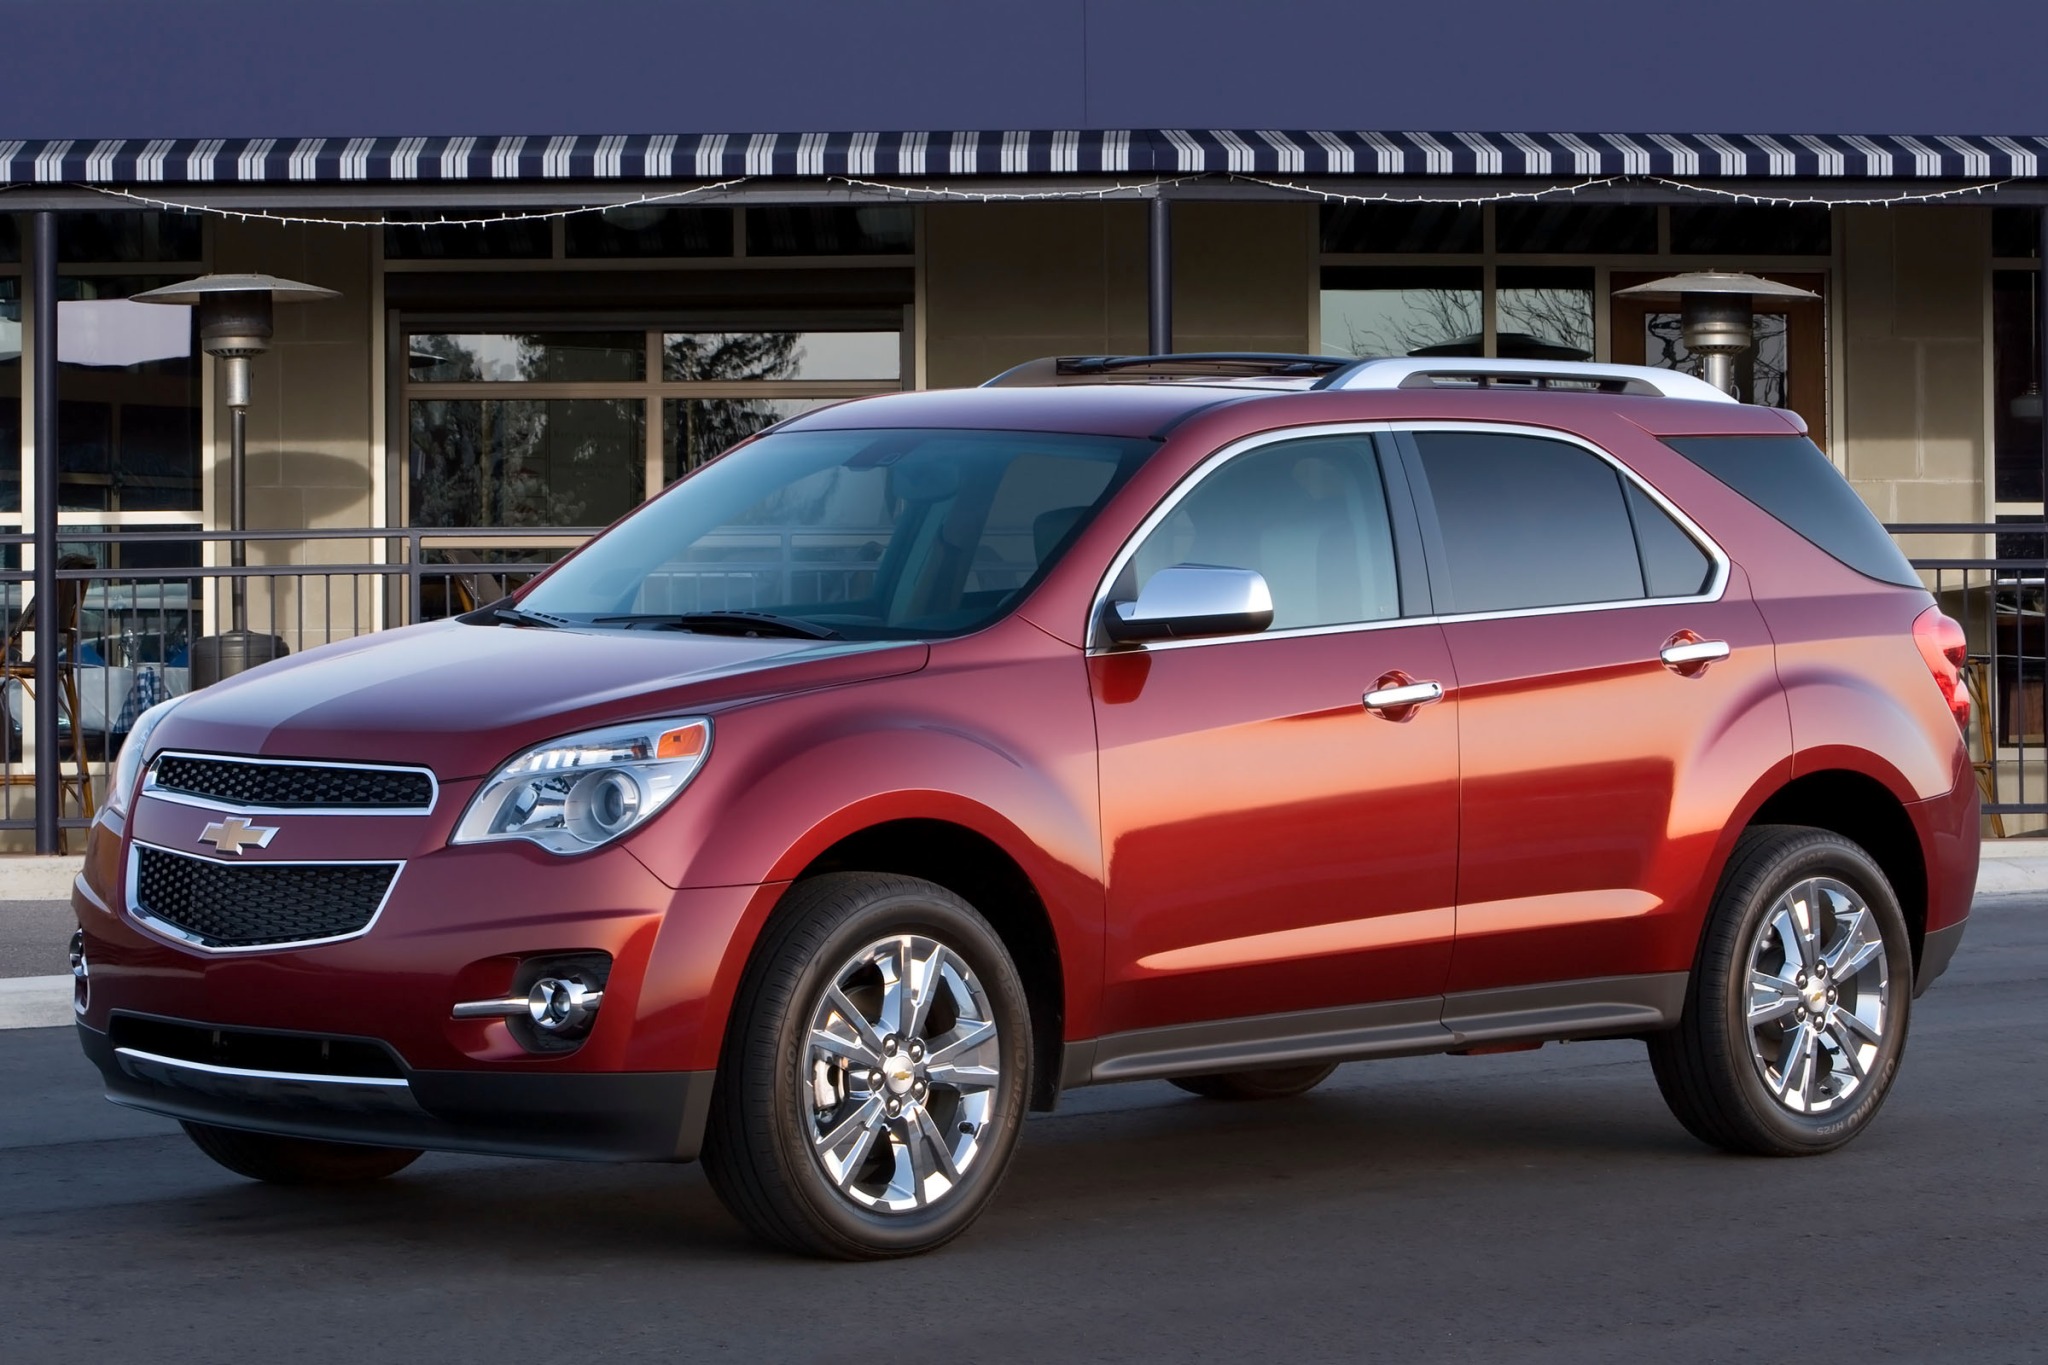 2013 Chevrolet Equinox Vin Number Search Autodetective